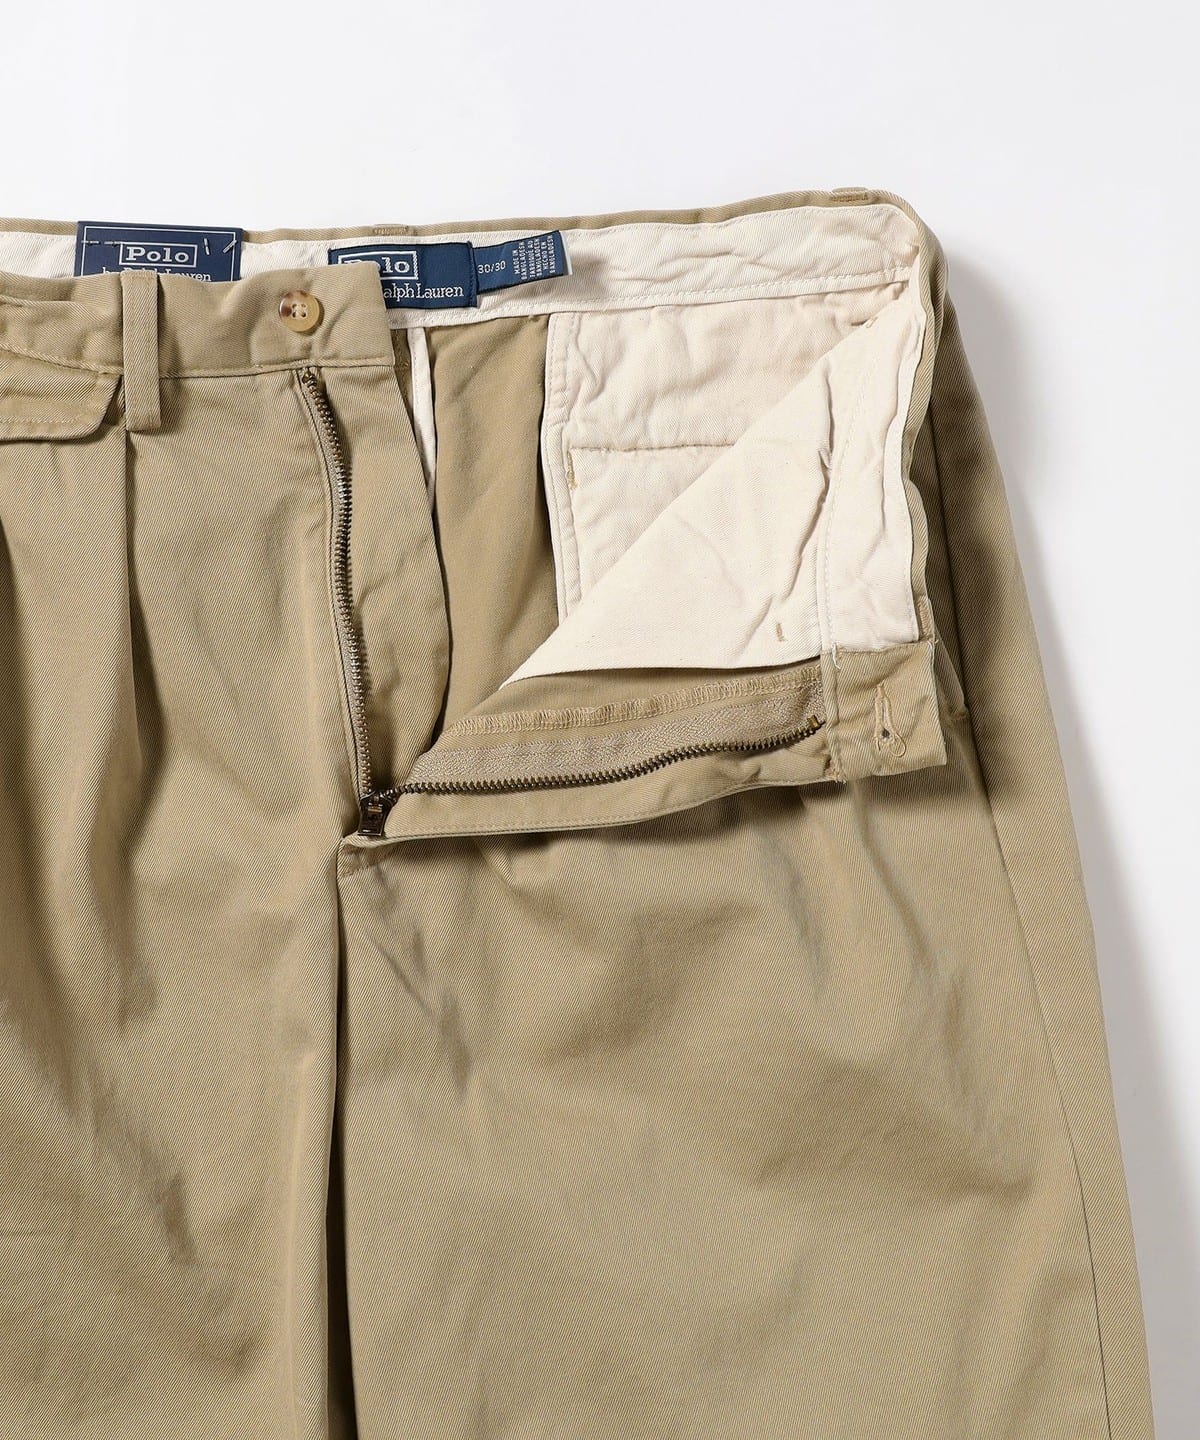 BEAMS POLO RALPH LAUREN / BEAMS Relaxed Fit Pleated Twill Pants 